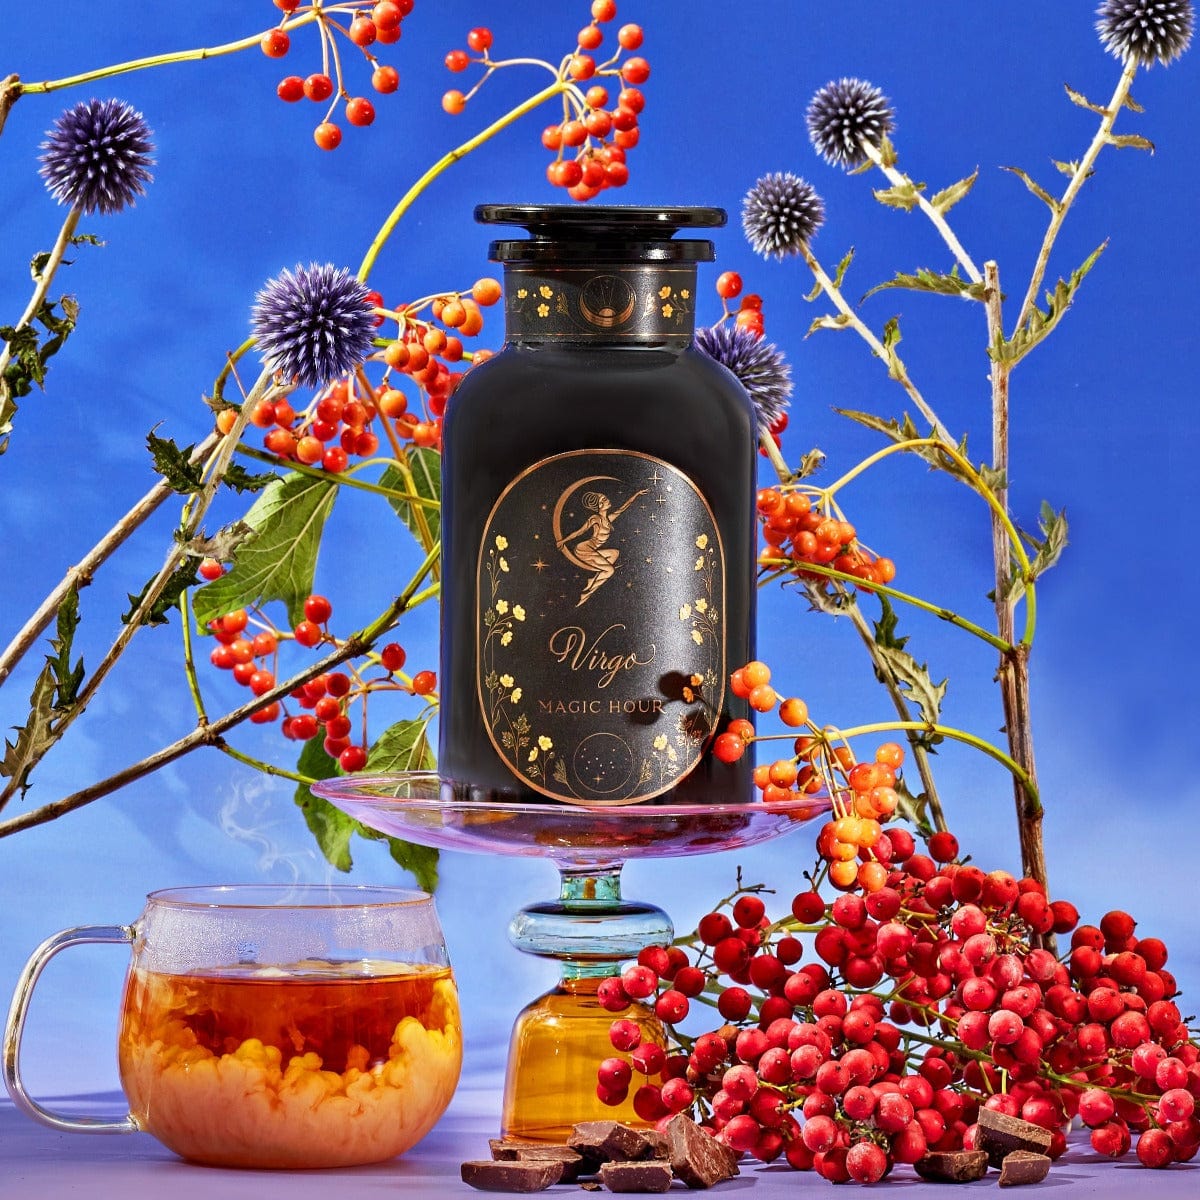 A black jar labeled &quot;Magic Hour Virgo Tea of Virtue, Wit &amp; Meticulous Magic&quot; sits on a glass stand among vibrant orange berries, purple thistle flowers, and leafy branches under a blue sky. Beside it, a clear glass mug of Organic Tea with loose leaf tea and a cluster of red berries complete the harmonious arrangement.